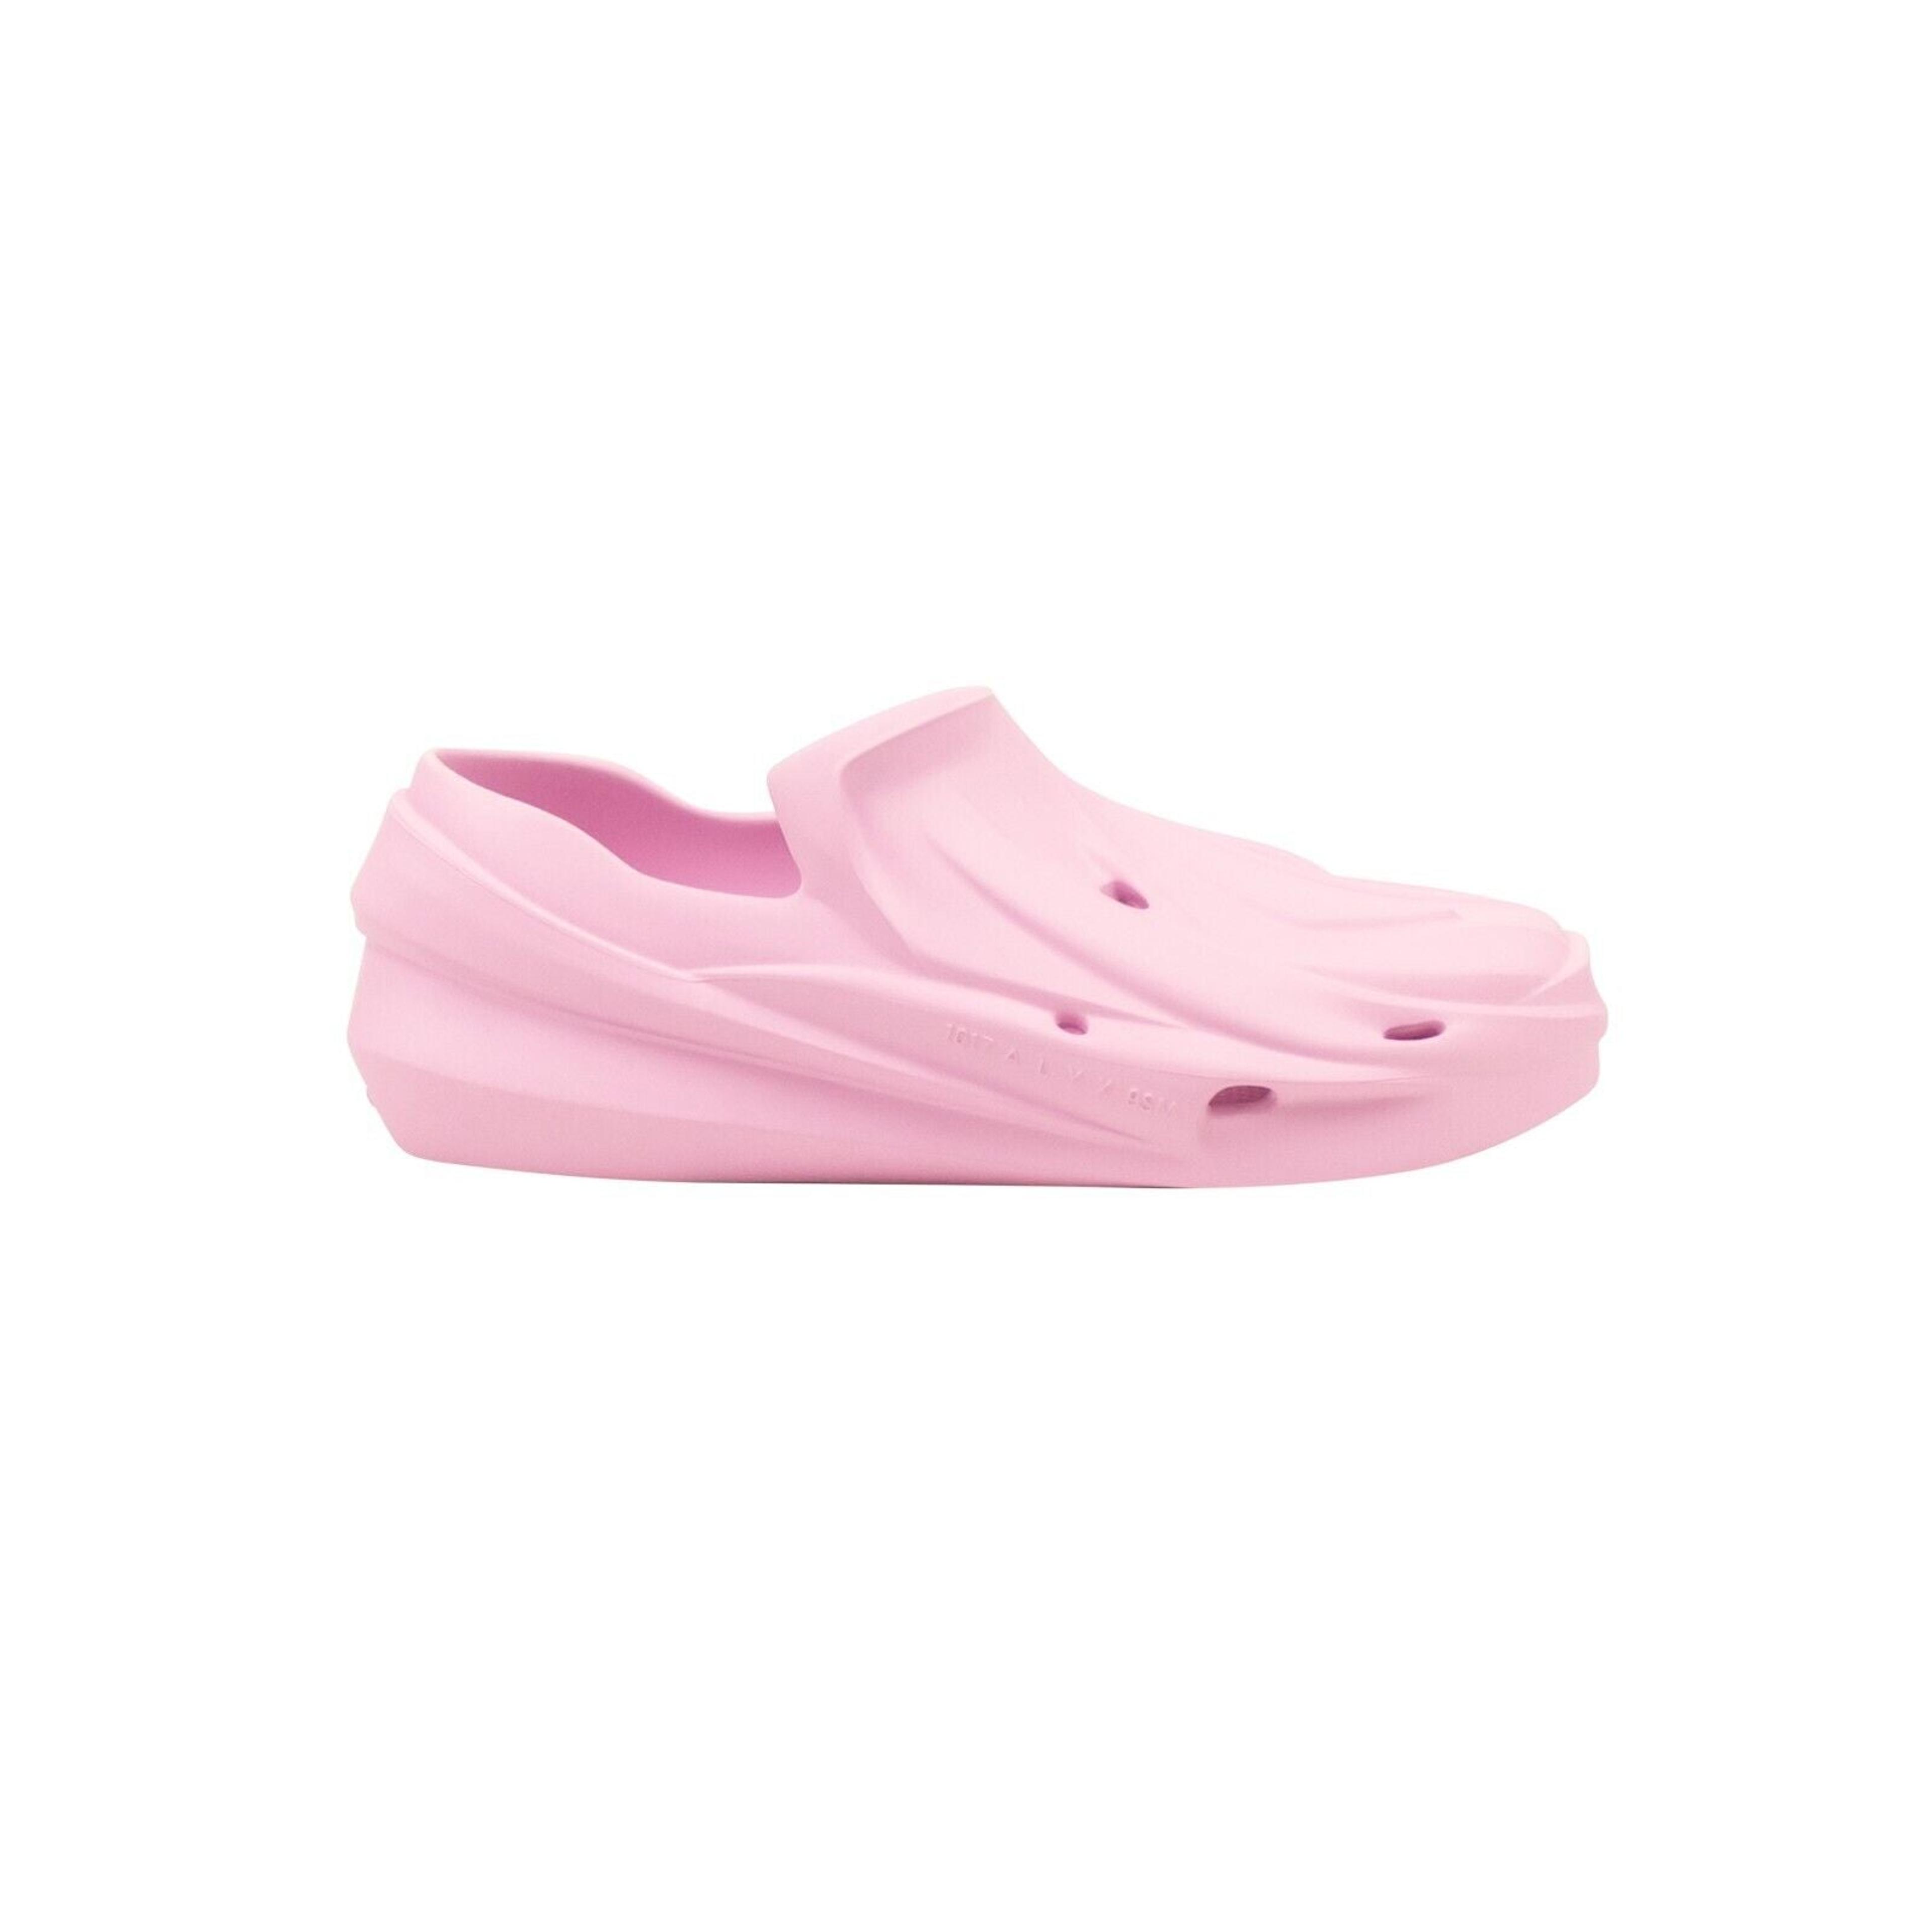 Alternate View 2 of Soft Pink Rubber Mono Slip On Shoes